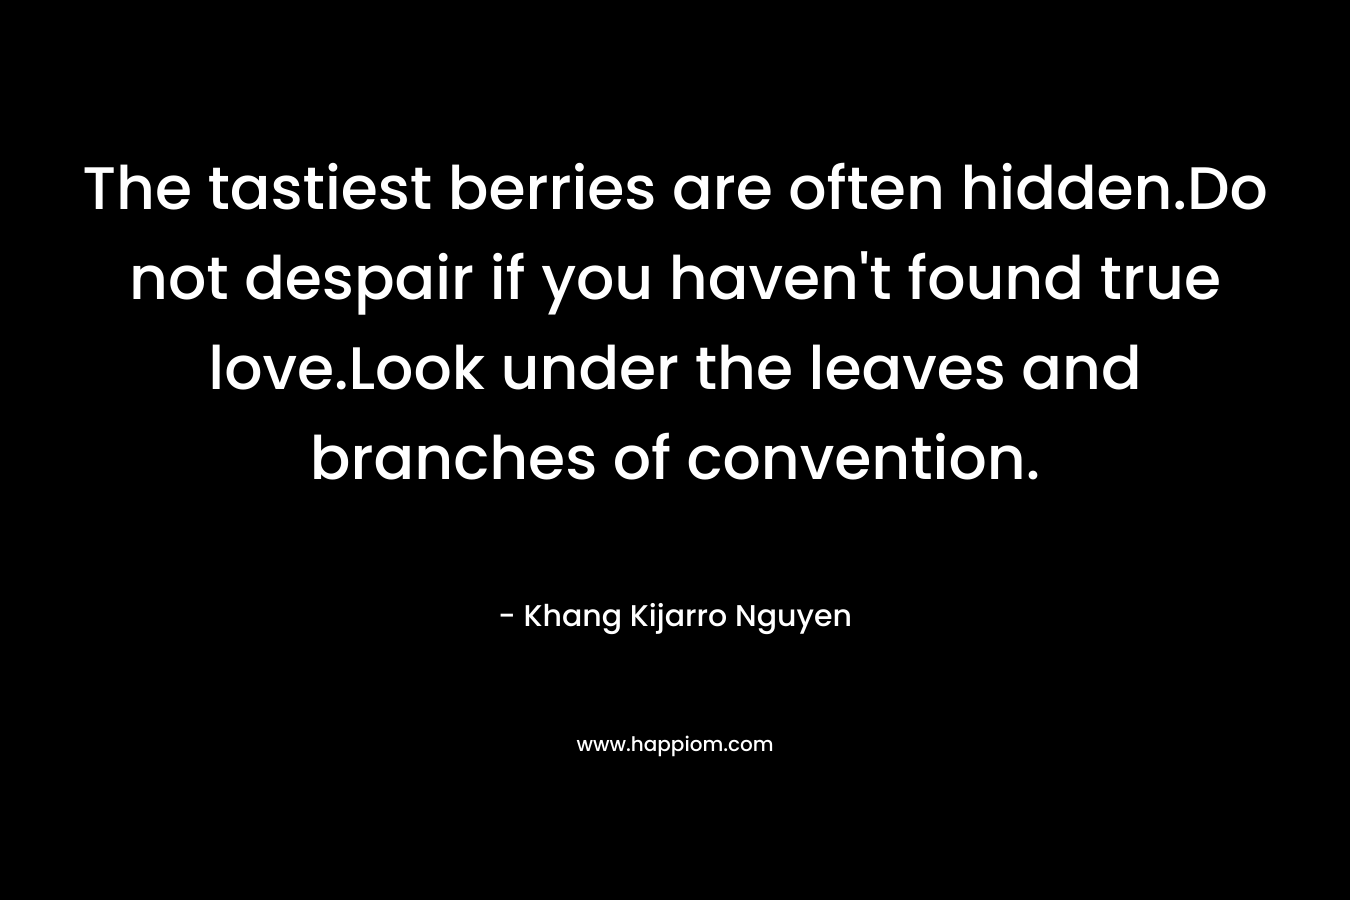 The tastiest berries are often hidden.Do not despair if you haven’t found true love.Look under the leaves and branches of convention. – Khang Kijarro Nguyen